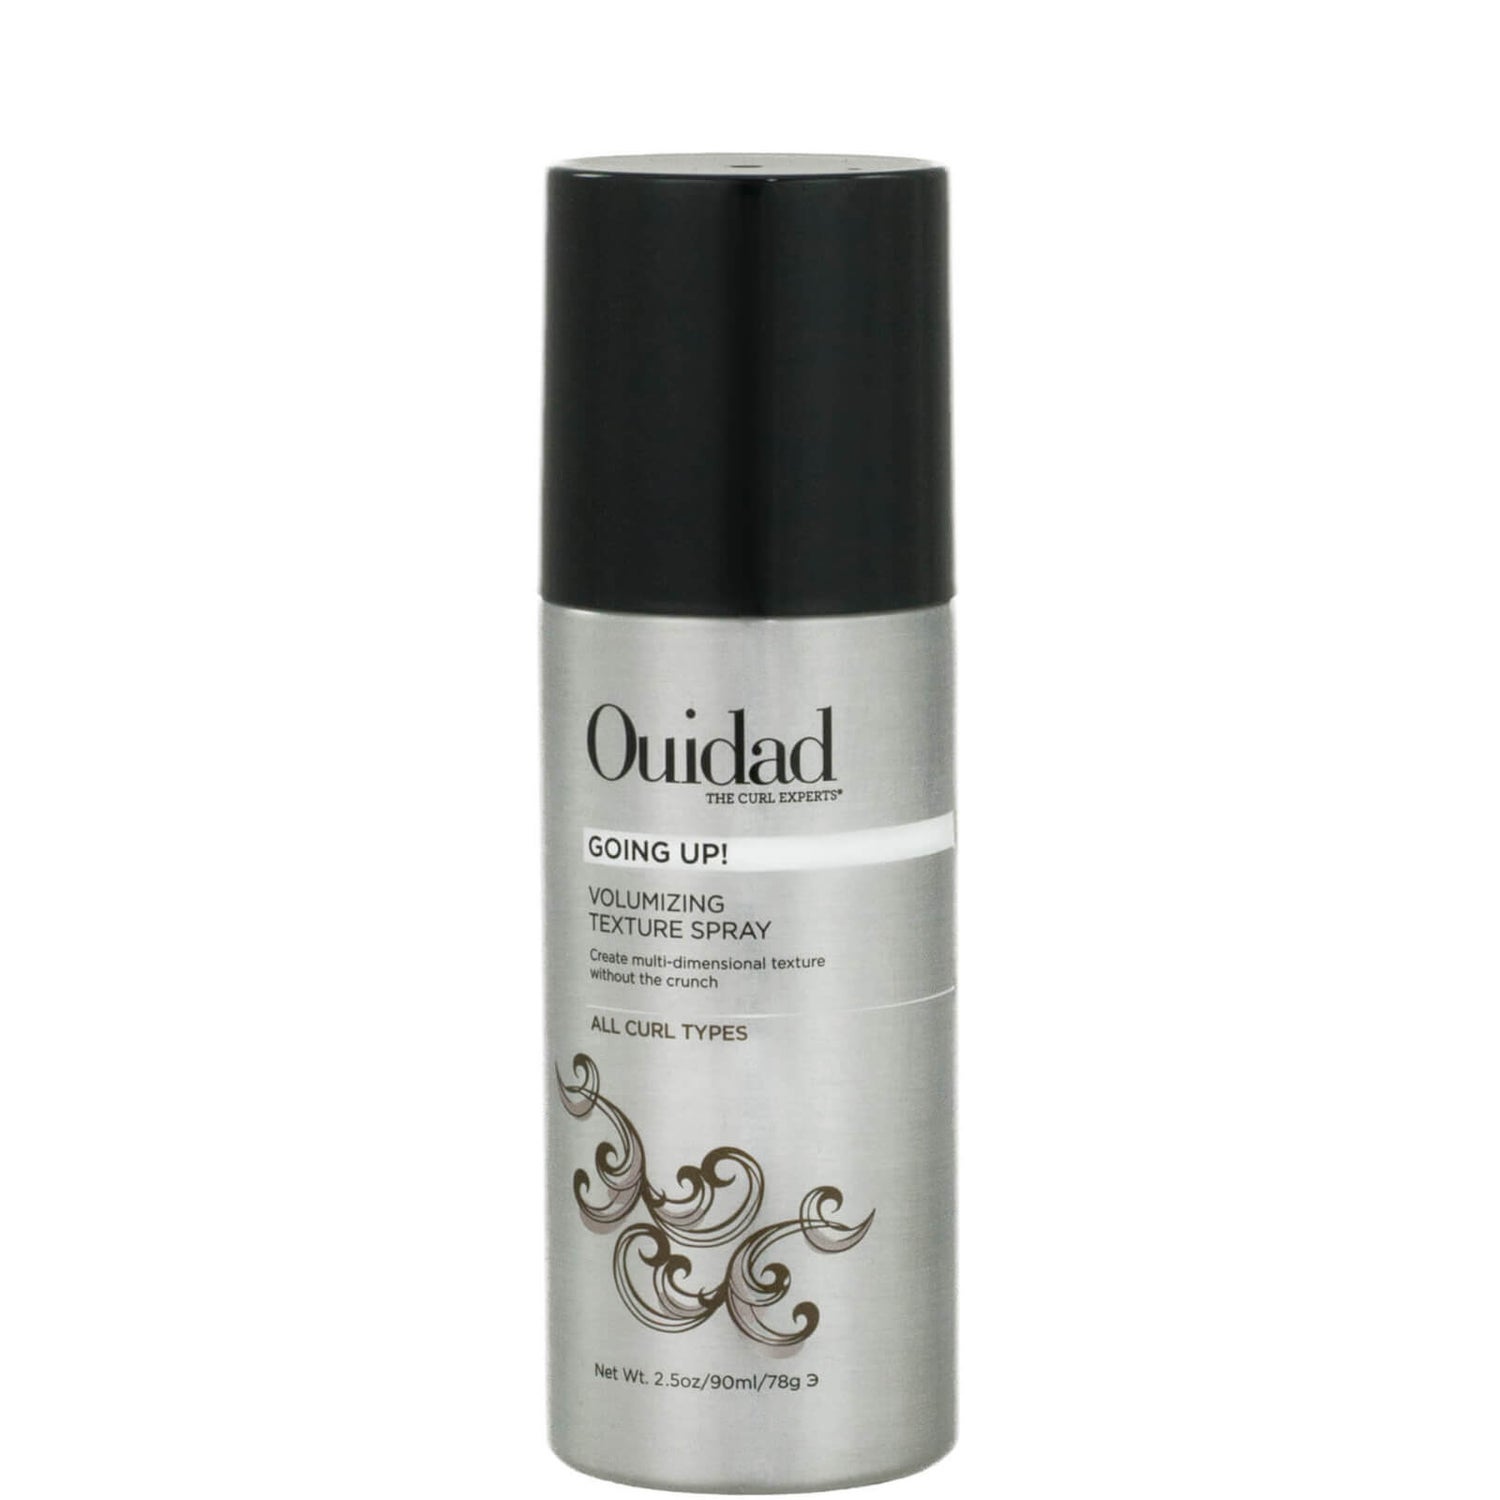 Ouidad Going Up! Texture Spray 74ml